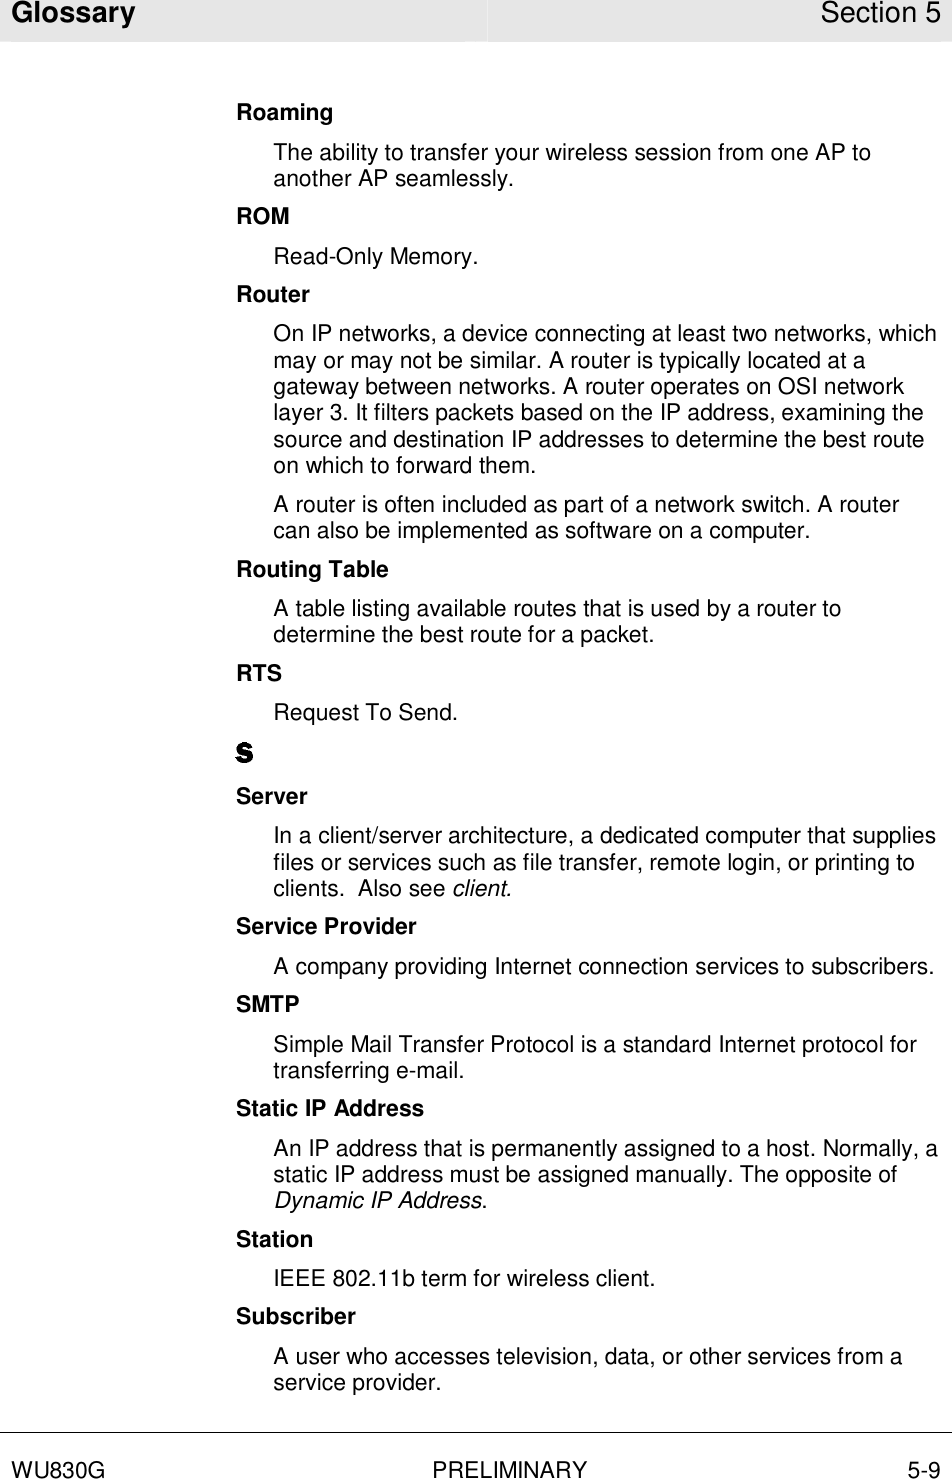 Glossary Section 5  WU830G PRELIMINARY 5-9  Roaming The ability to transfer your wireless session from one AP to another AP seamlessly. ROM Read-Only Memory. Router On IP networks, a device connecting at least two networks, which may or may not be similar. A router is typically located at a gateway between networks. A router operates on OSI network layer 3. It filters packets based on the IP address, examining the source and destination IP addresses to determine the best route on which to forward them.  A router is often included as part of a network switch. A router can also be implemented as software on a computer. Routing Table A table listing available routes that is used by a router to determine the best route for a packet. RTS Request To Send. Server In a client/server architecture, a dedicated computer that supplies files or services such as file transfer, remote login, or printing to clients.  Also see client. Service Provider A company providing Internet connection services to subscribers. SMTP Simple Mail Transfer Protocol is a standard Internet protocol for transferring e-mail. Static IP Address An IP address that is permanently assigned to a host. Normally, a static IP address must be assigned manually. The opposite of Dynamic IP Address. Station IEEE 802.11b term for wireless client. Subscriber A user who accesses television, data, or other services from a service provider. 